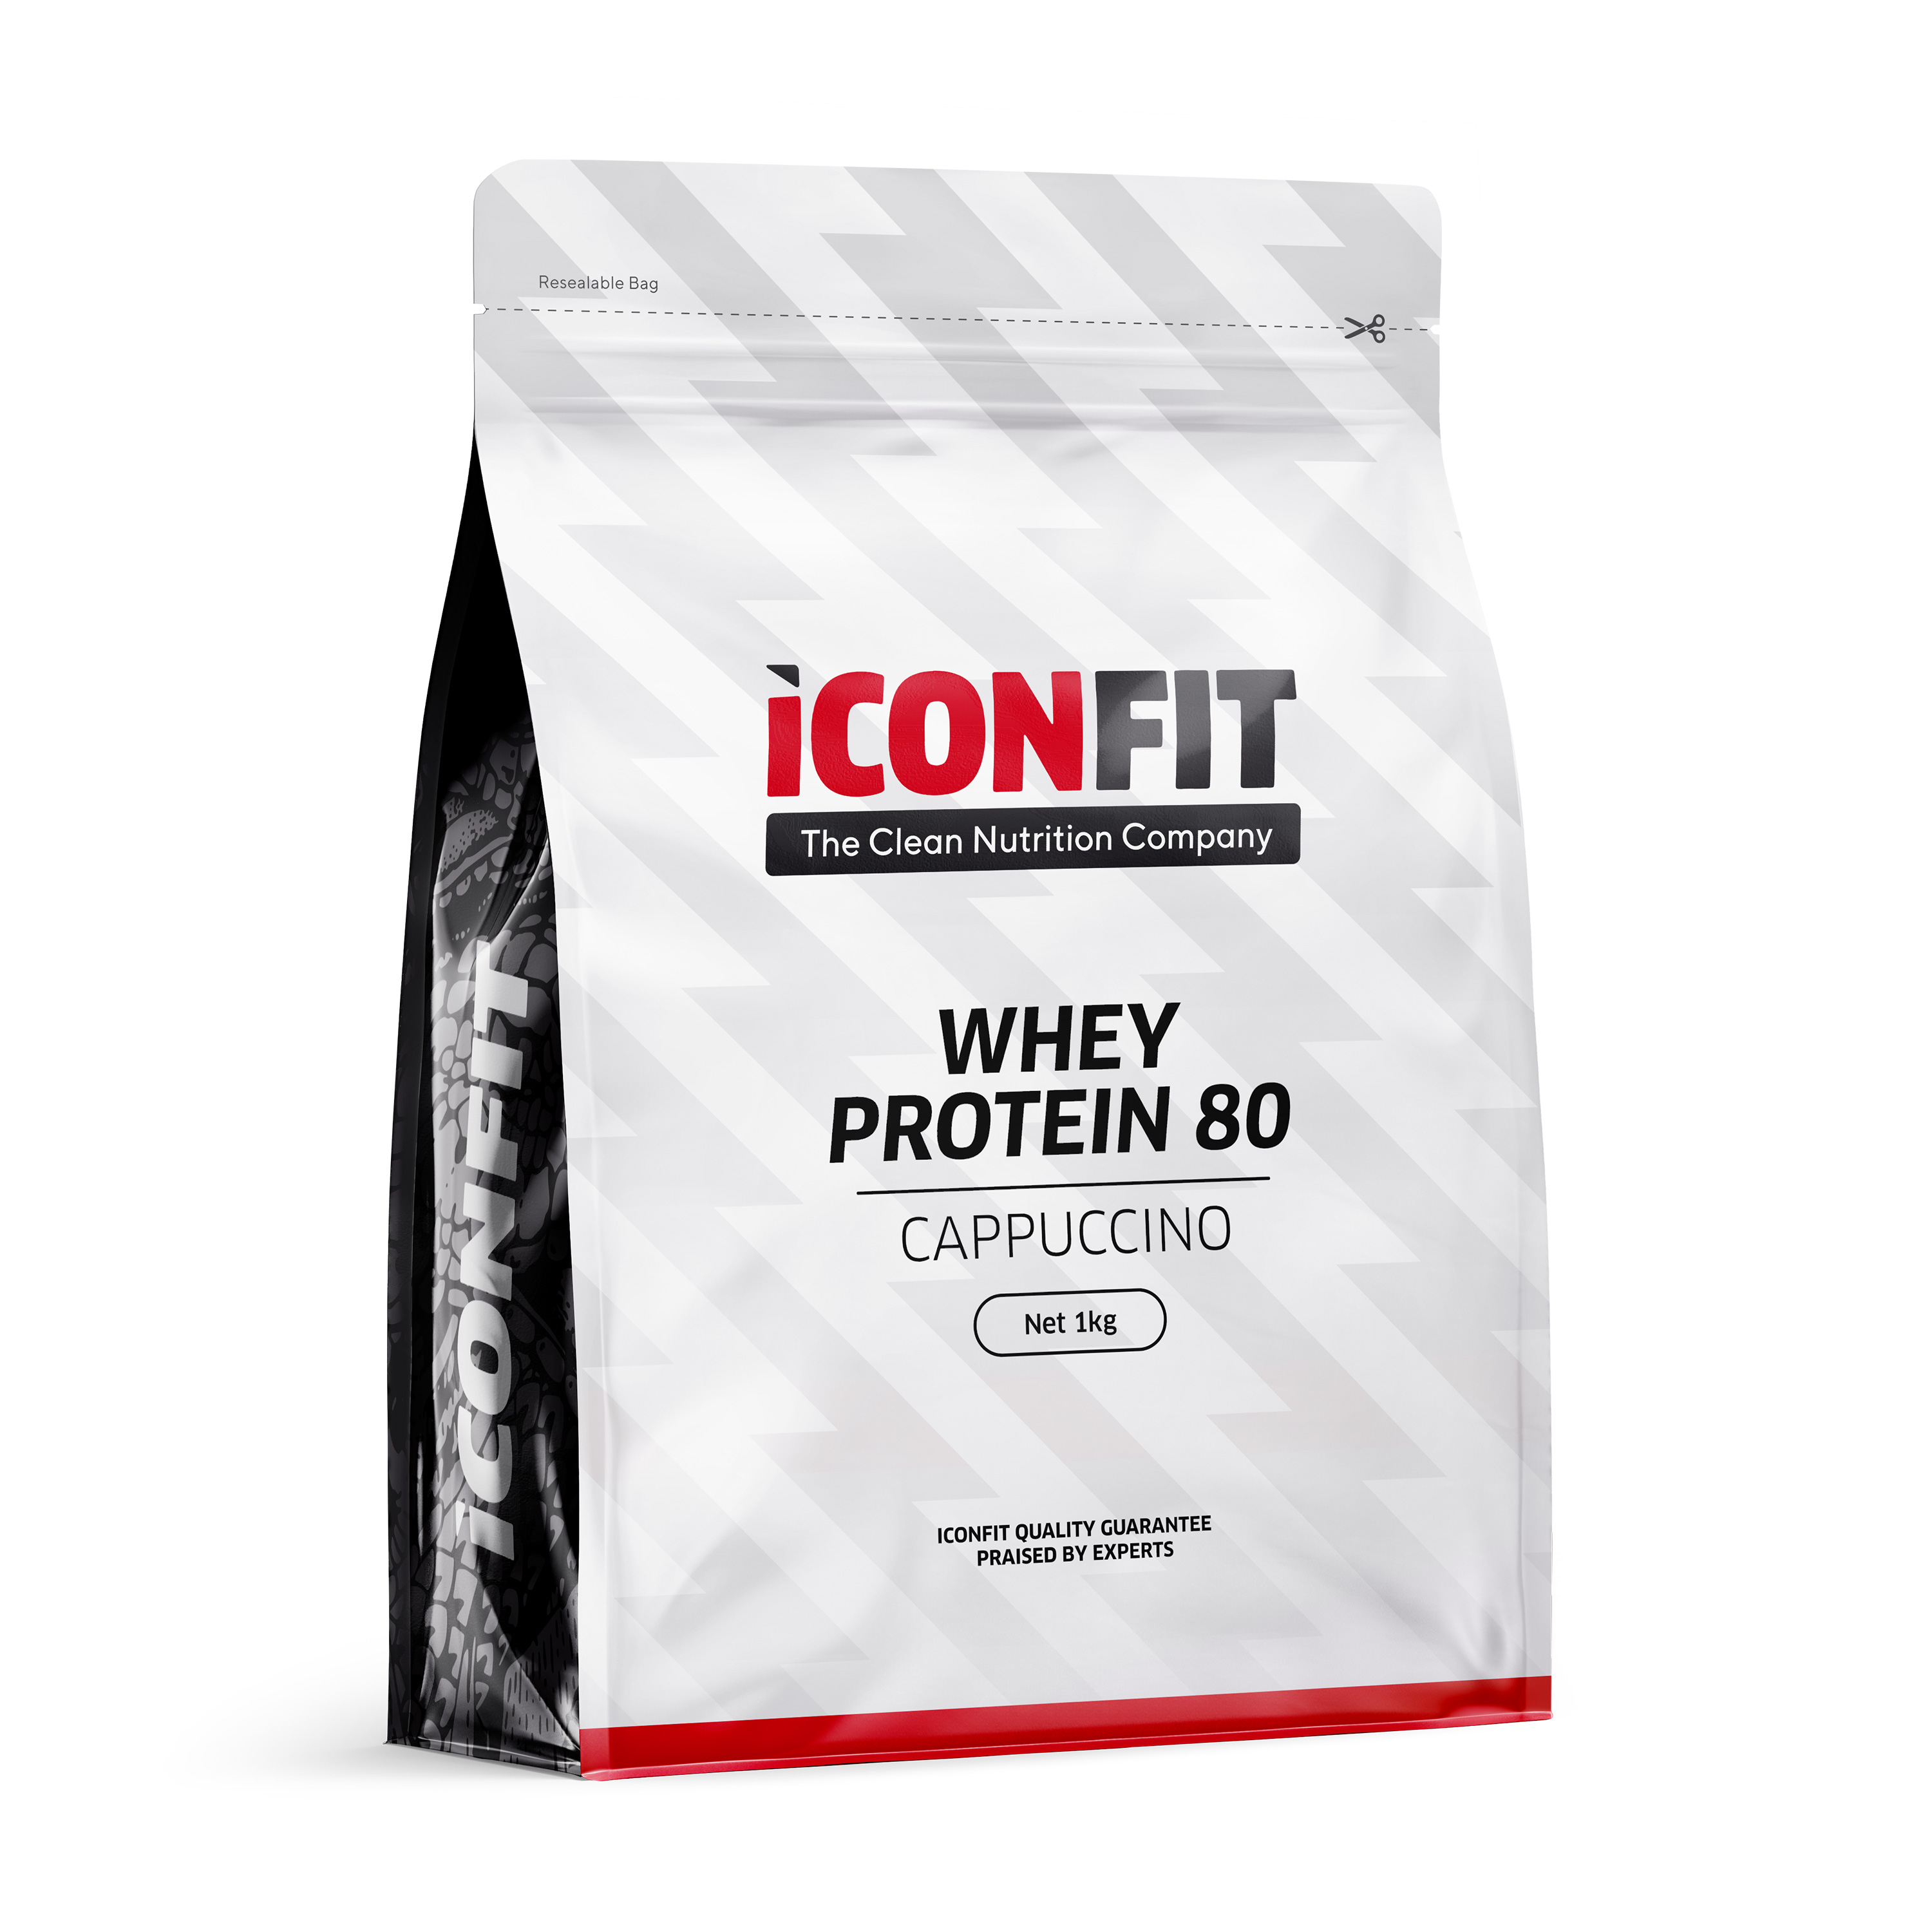 ICONFIT-Whey-Protein-80-Cappuccino-1000g